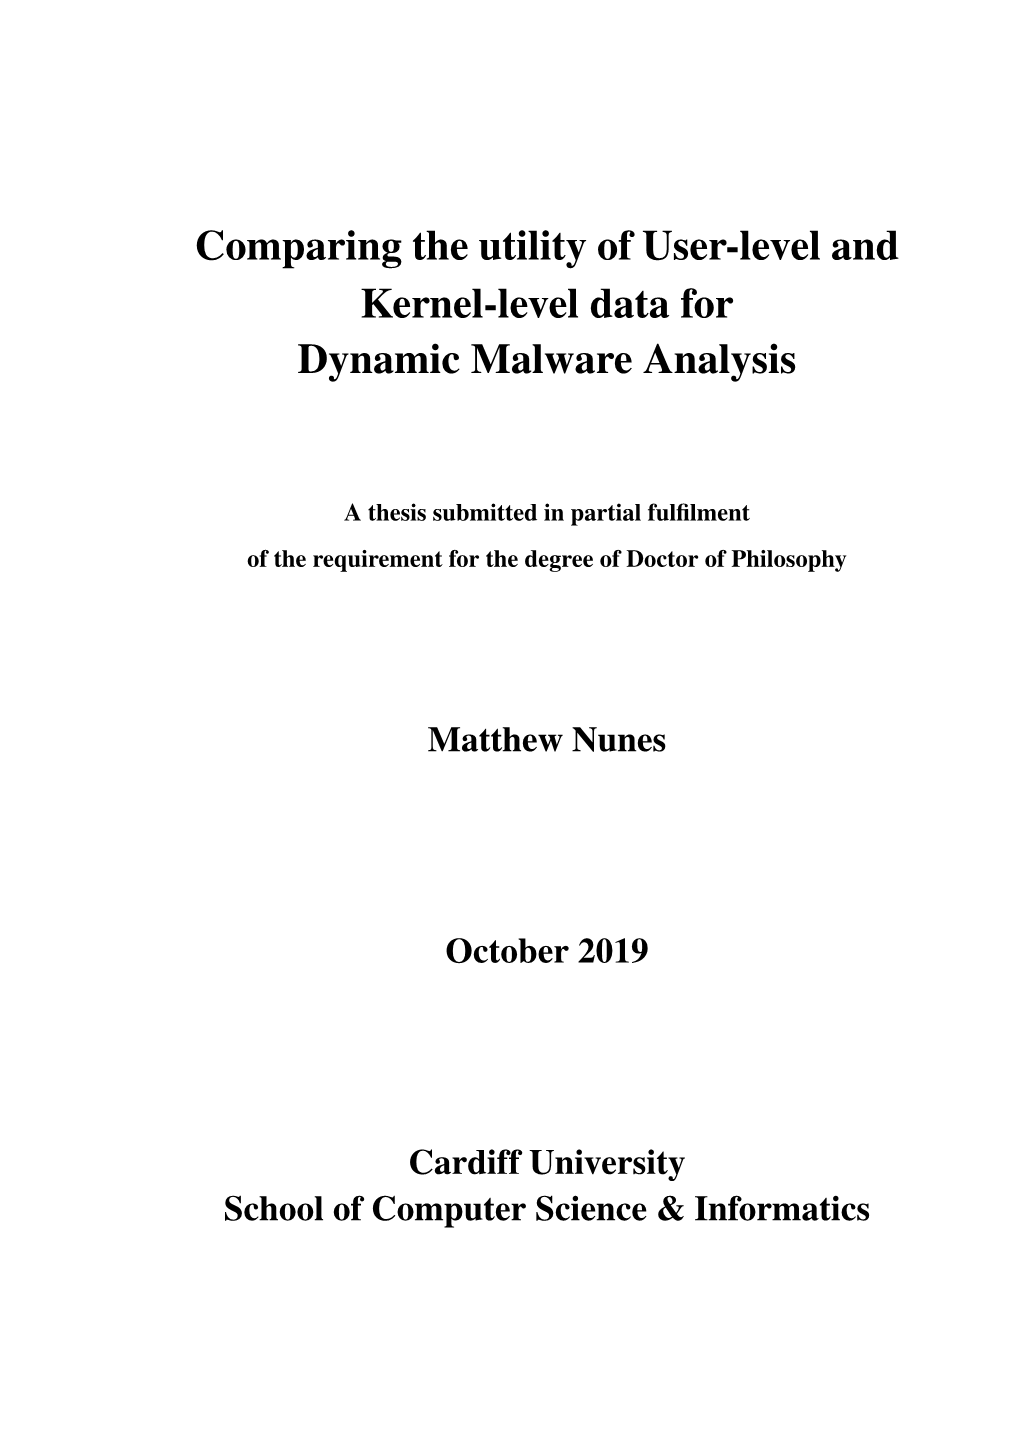 Comparing the Utility of User-Level and Kernel-Level Data for Dynamic Malware Analysis